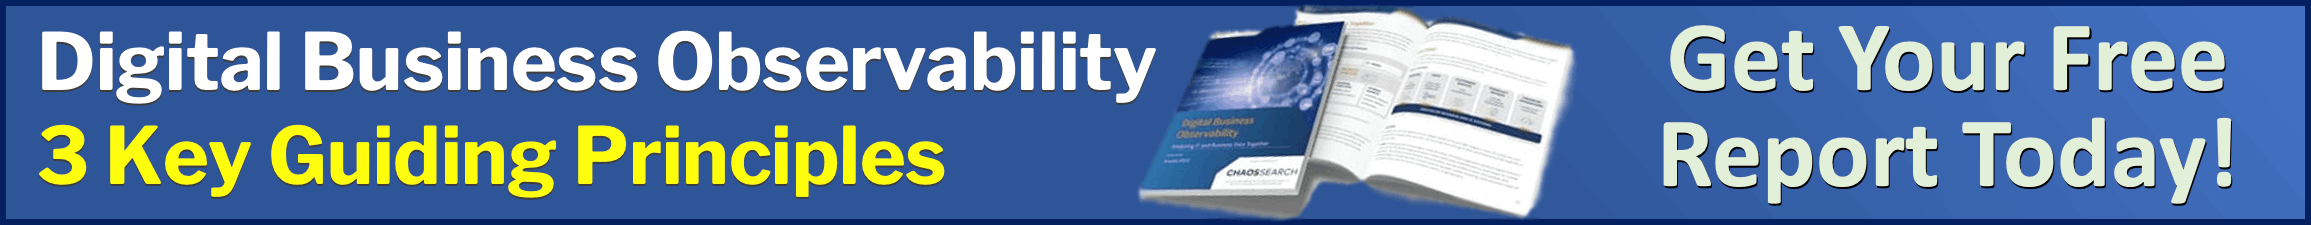 Digital Business Observability: 3 Key Guiding Principles. Get Your Free Report Today!